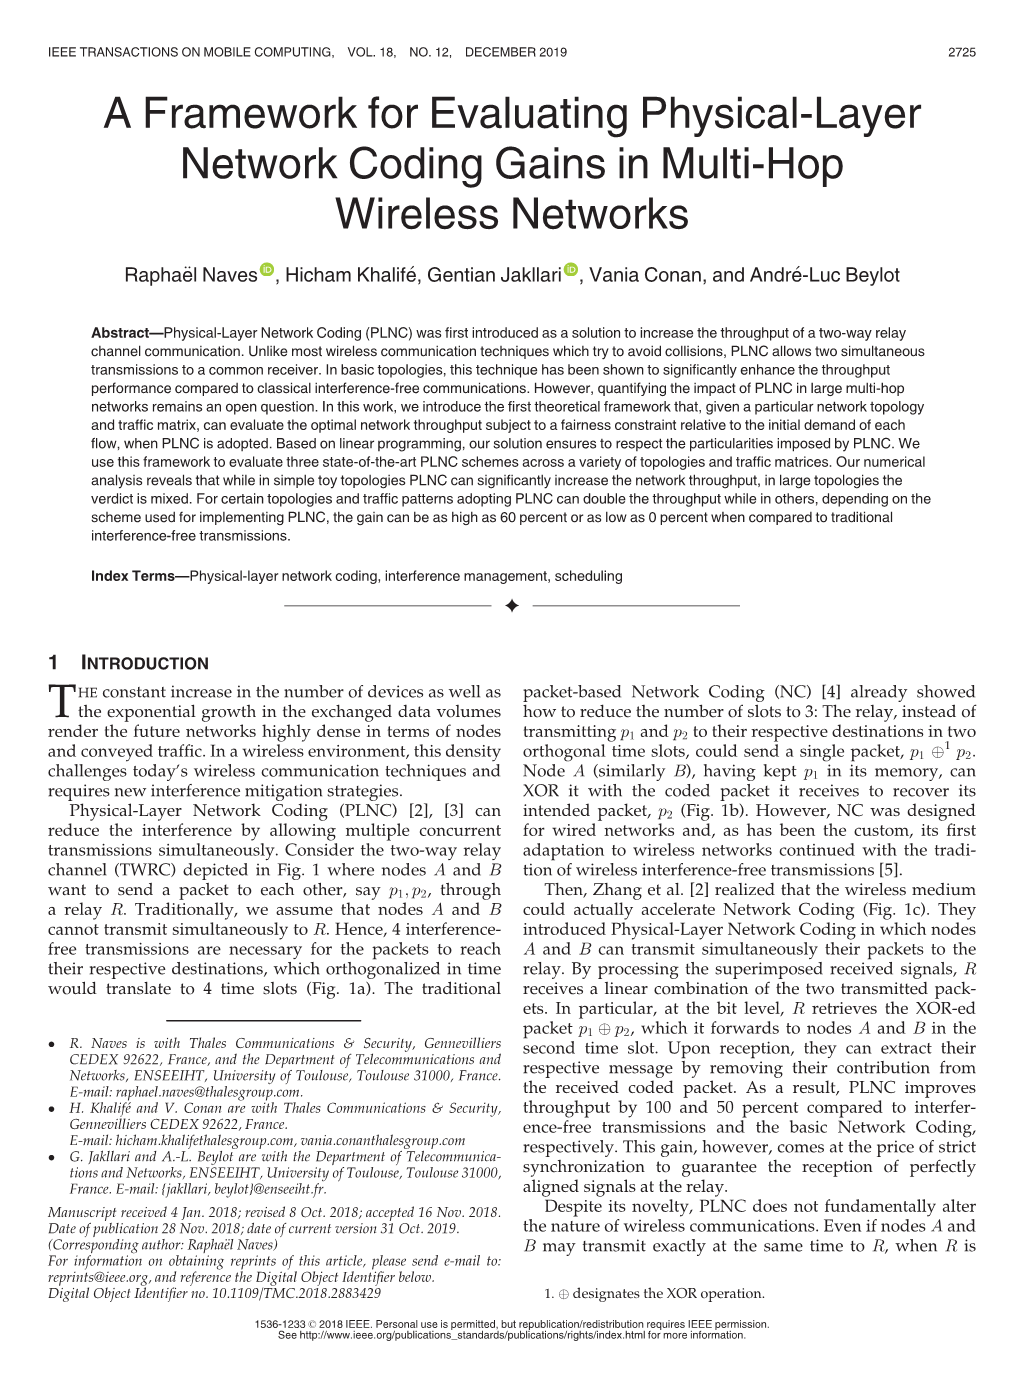 A Framework for Evaluating Physical-Layer Network Coding Gains in Multi-Hop Wireless Networks